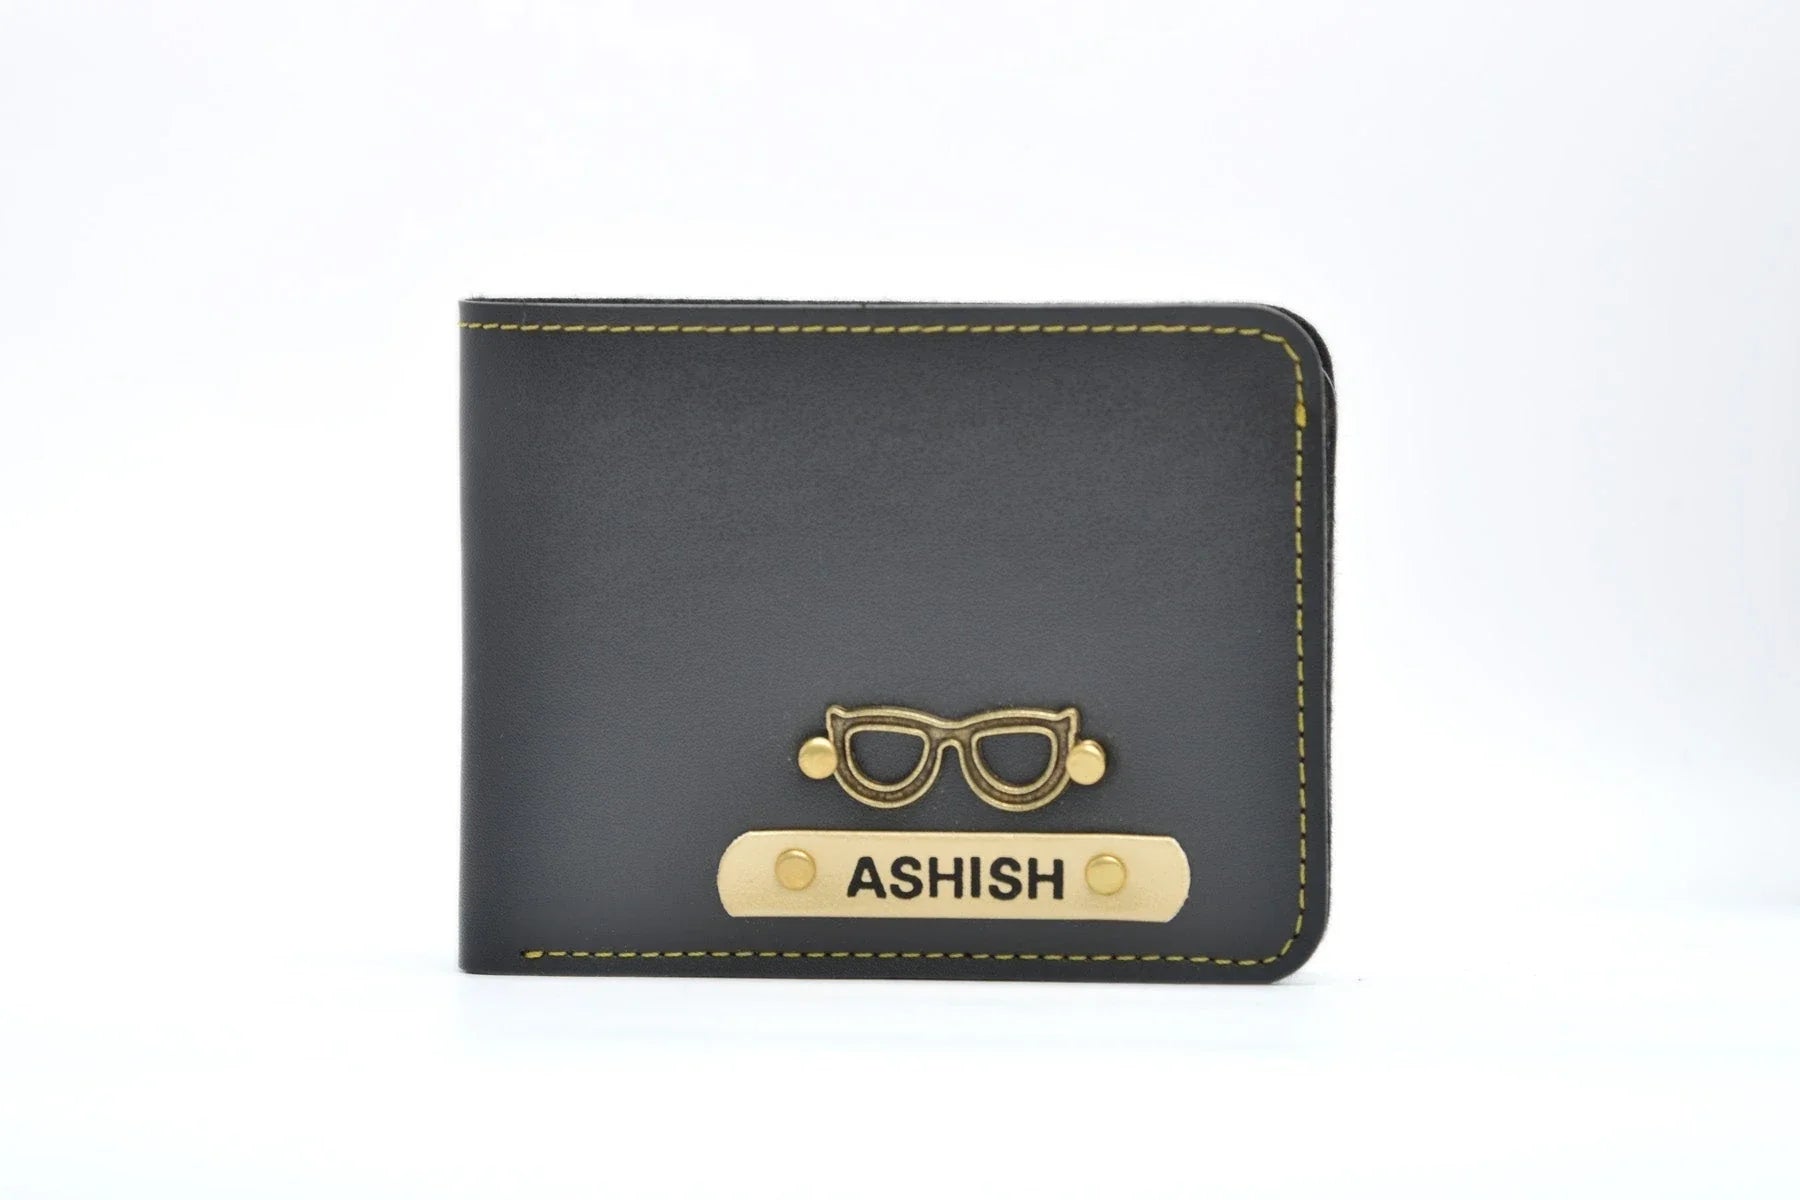 Stylish wallet made with the best quality synthetic leather is the perfect touch to any office/formal outfit. The option to customize it with your name and lucky charm makes it that much more personal and unique. This also makes for a best business gift! Always be trending and in style with our personalized wallets.